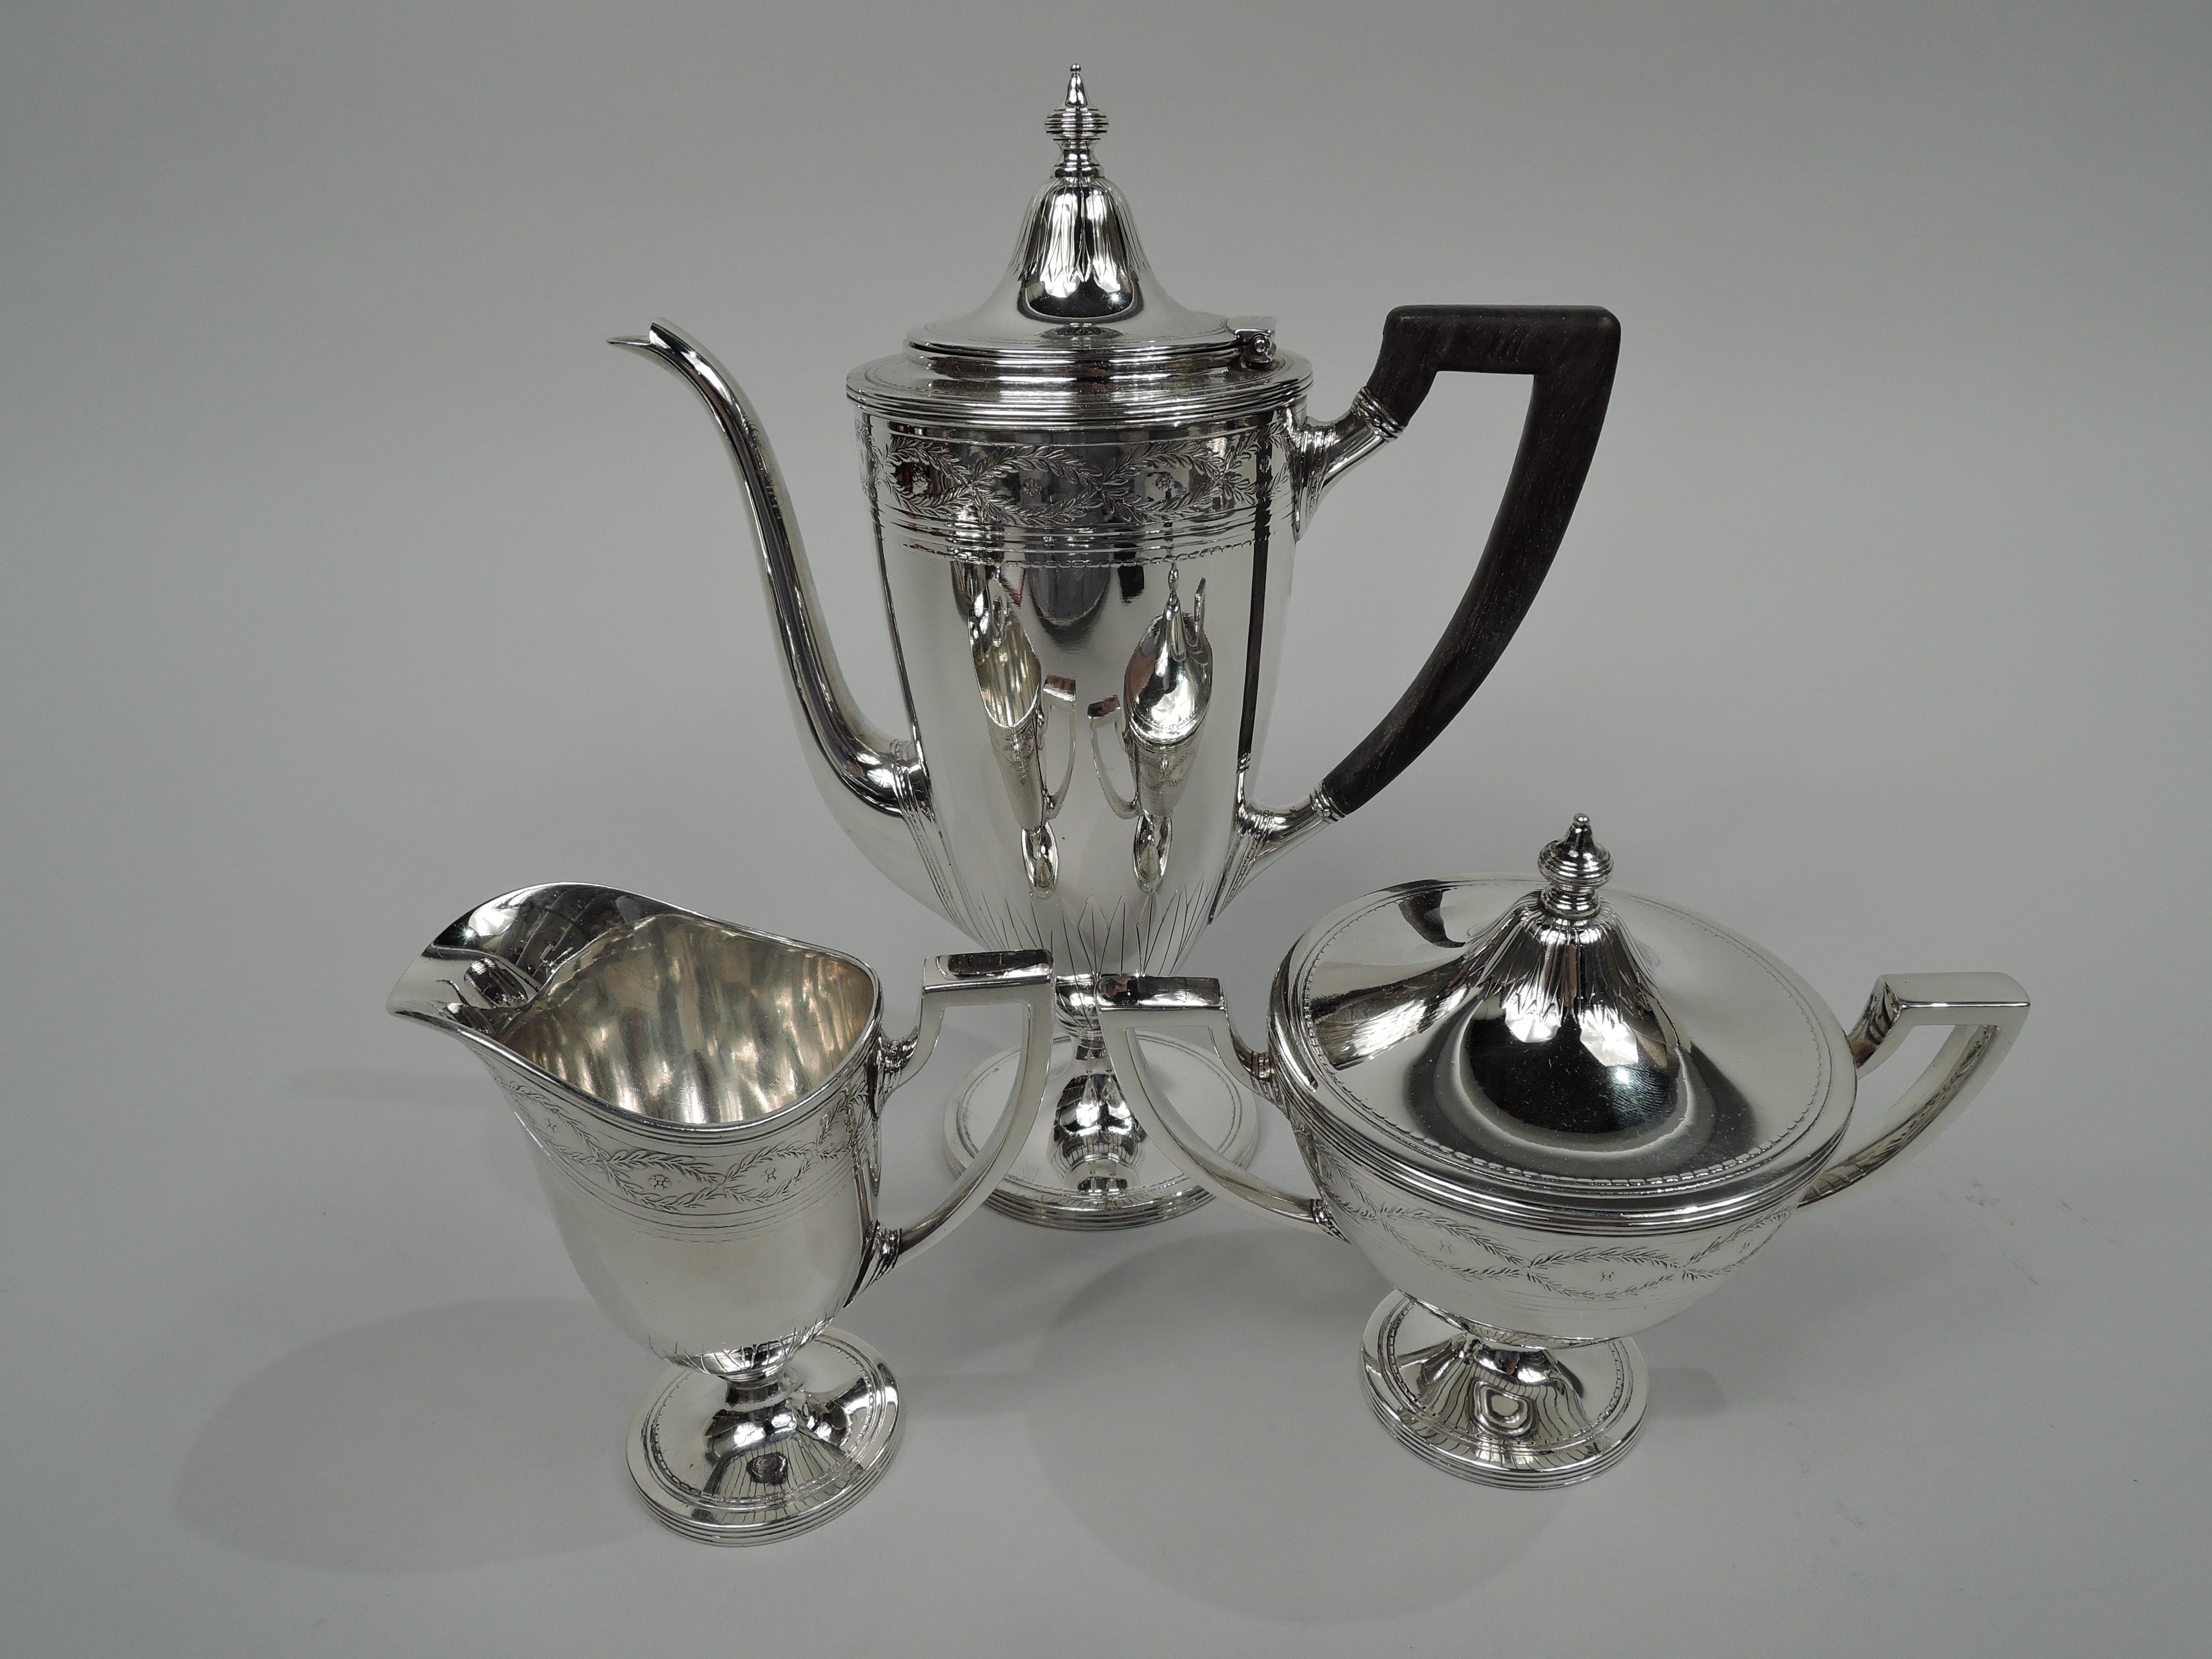 Winthrop sterling silver coffee set on tray. Made by Tiffany & Co. in New York, ca 1925. This comprises coffeepot, creamer, and sugar on tray.

Coffeepot: Tapering body on raised foot, hinged and domed cover with vasiform finial, vertical s-scroll